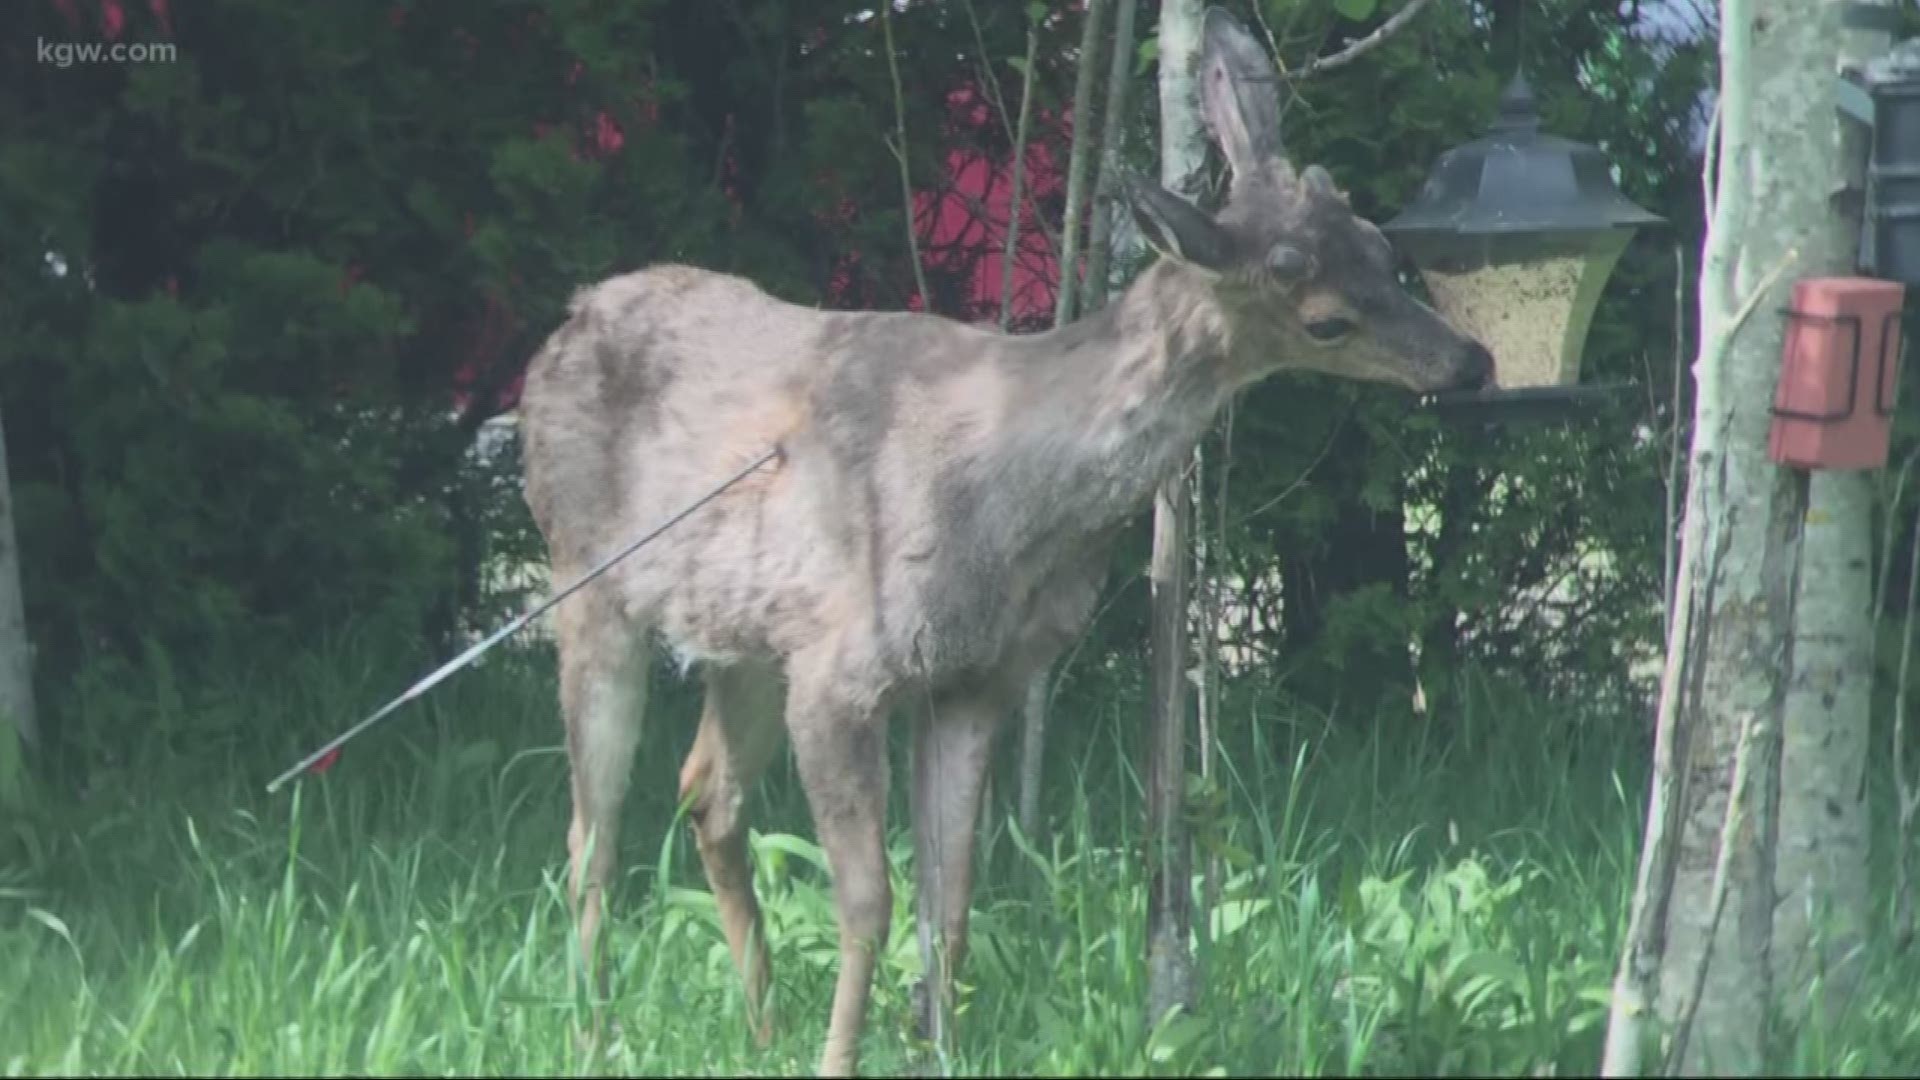 Another deer was shot with an arrow. This time in Salem.